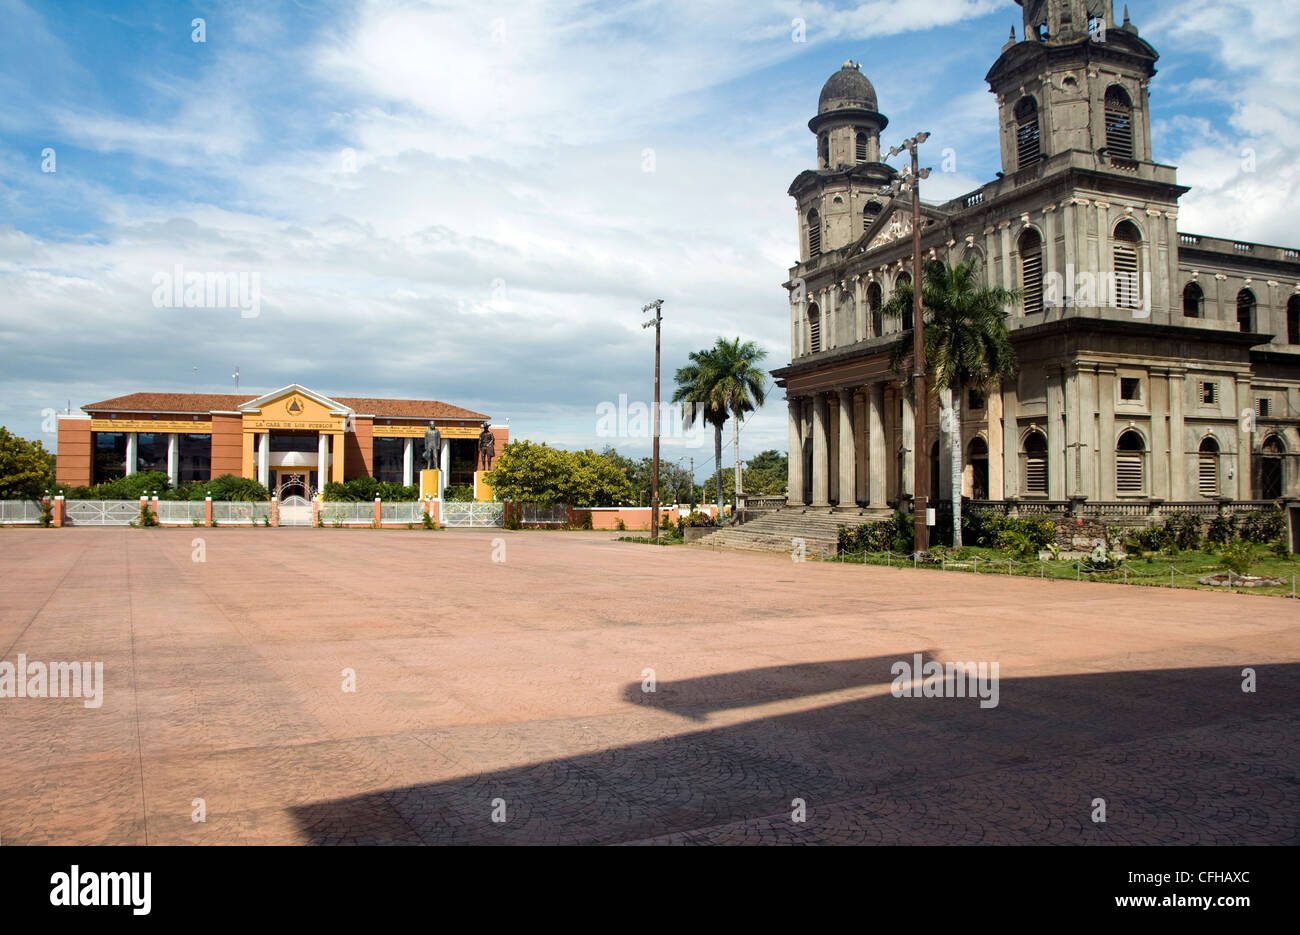 Plaza of the Revolution Cathedral of Santiago The Old Cathedral Plaza of the Republic House of the People Presidential Palace Ca Stock Photo